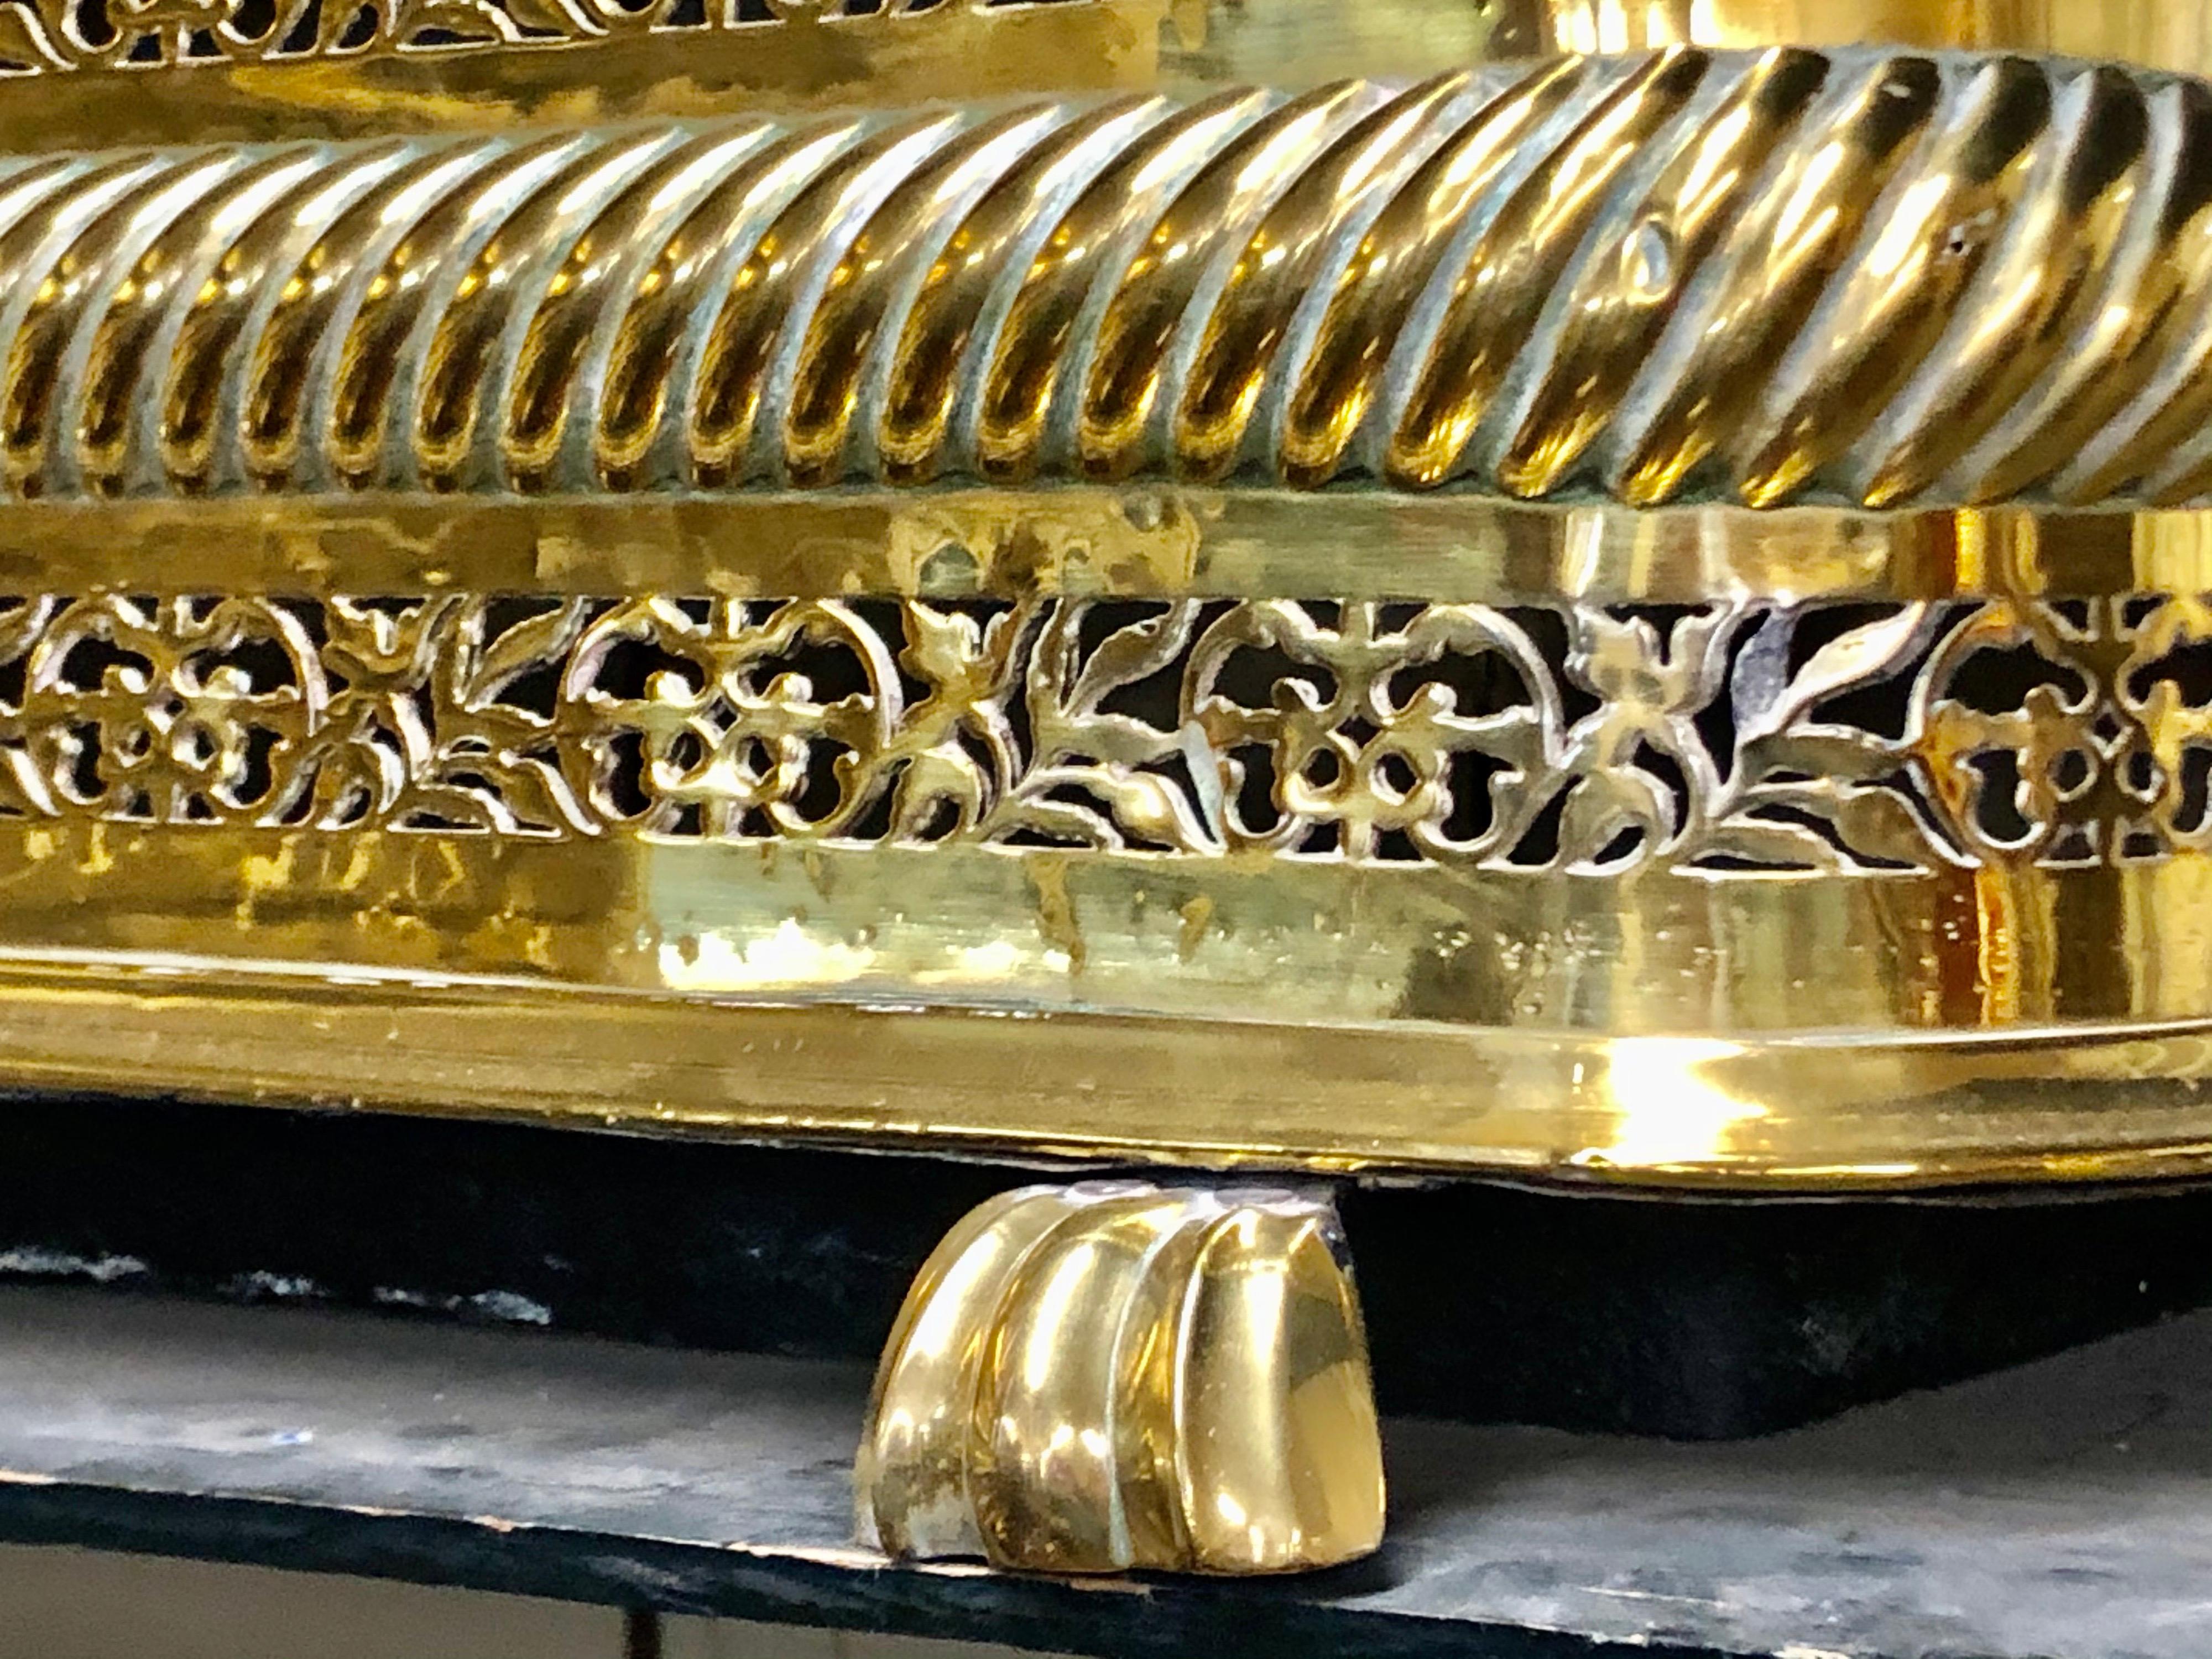 Exceptionally fine Antique English Geo. III pierced solid brass Fireplace Fender with delicate piercing overall with wonderful original shell-shaped feet. Retains its original 